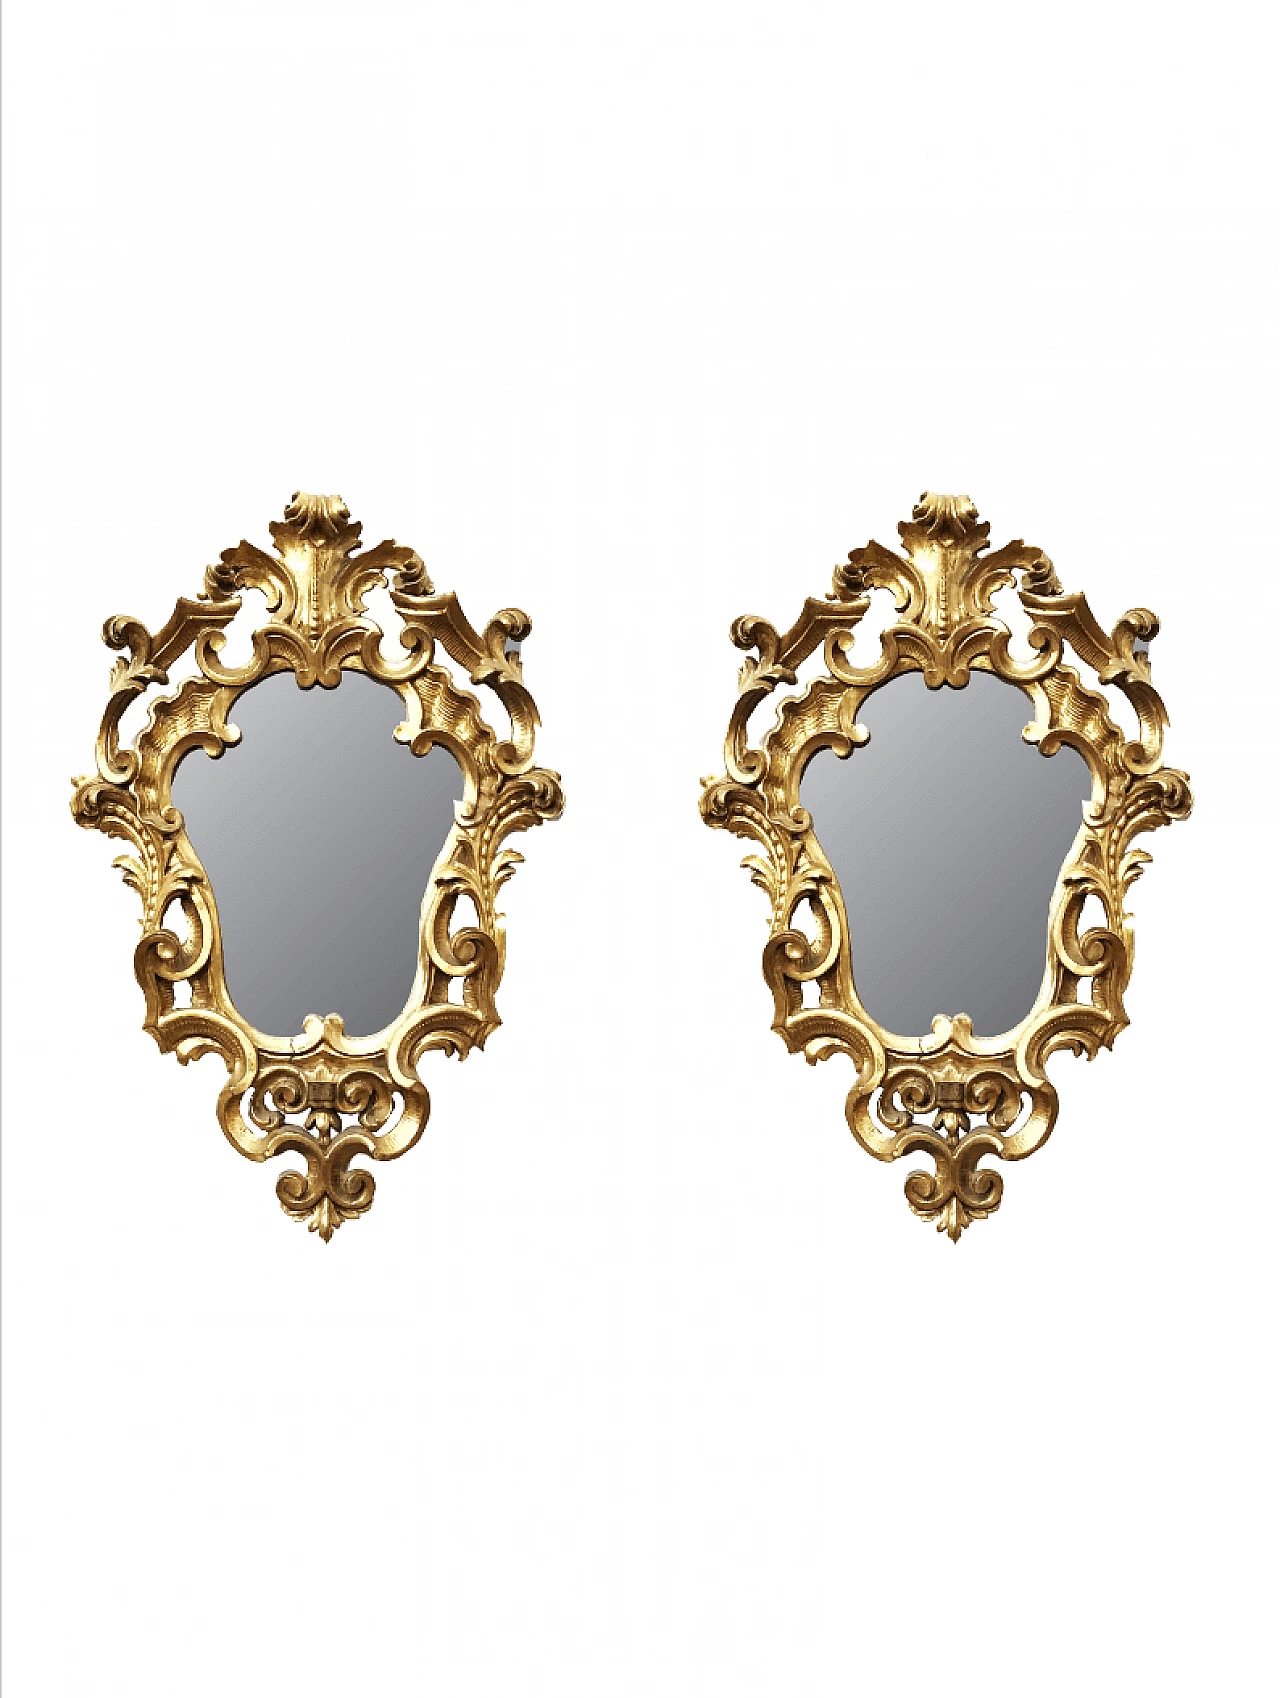 Pair of Baroque style carved gilded mirrors, Italy, early 20th century 1039025